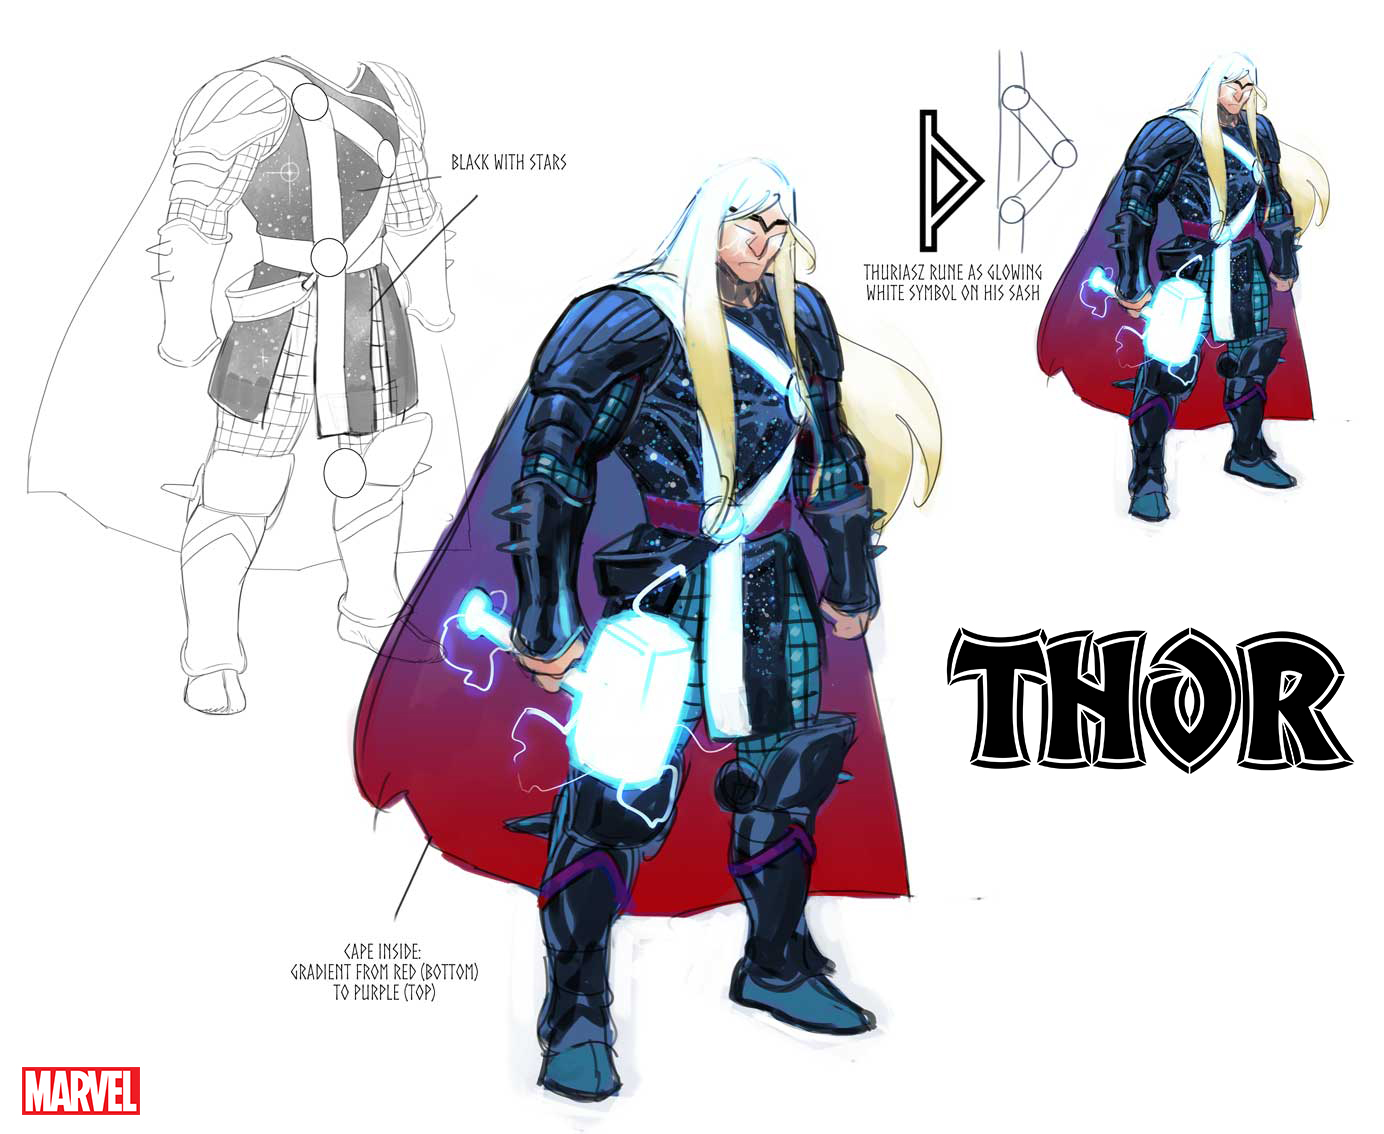 NYCC '19: Marvel's Next Big Thing reveals Donny Cates and Nic Klein take over Thor in 2020